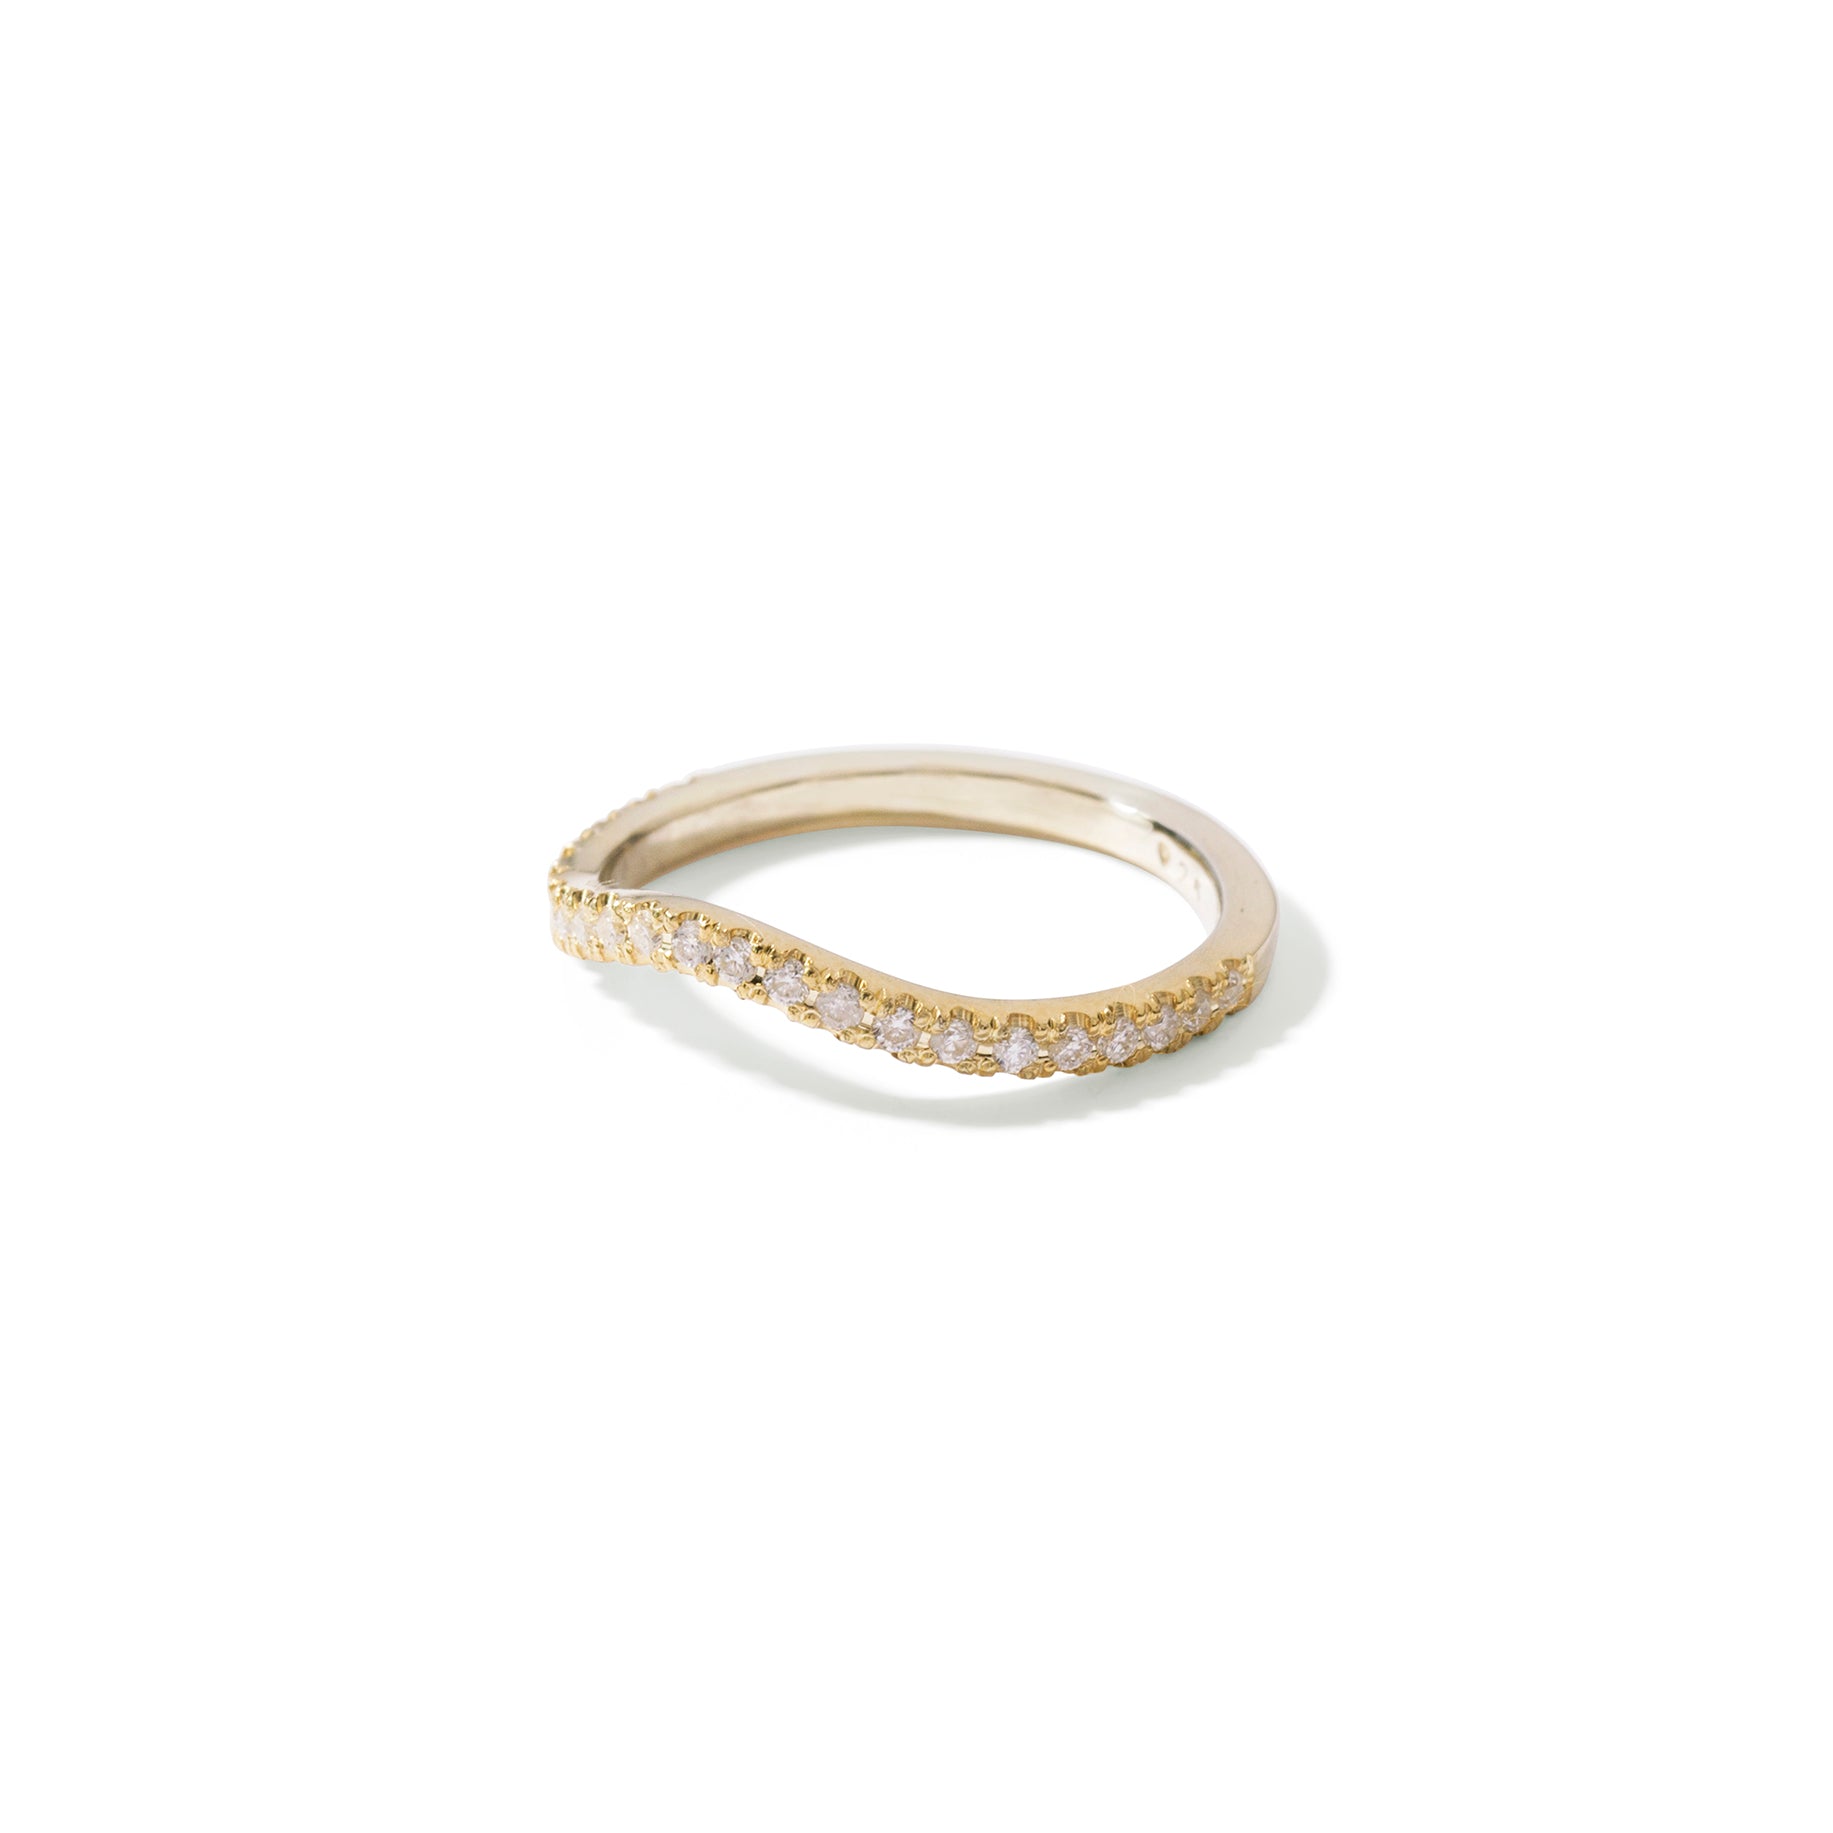 9ct gold curved 1/2 eternity wedding band